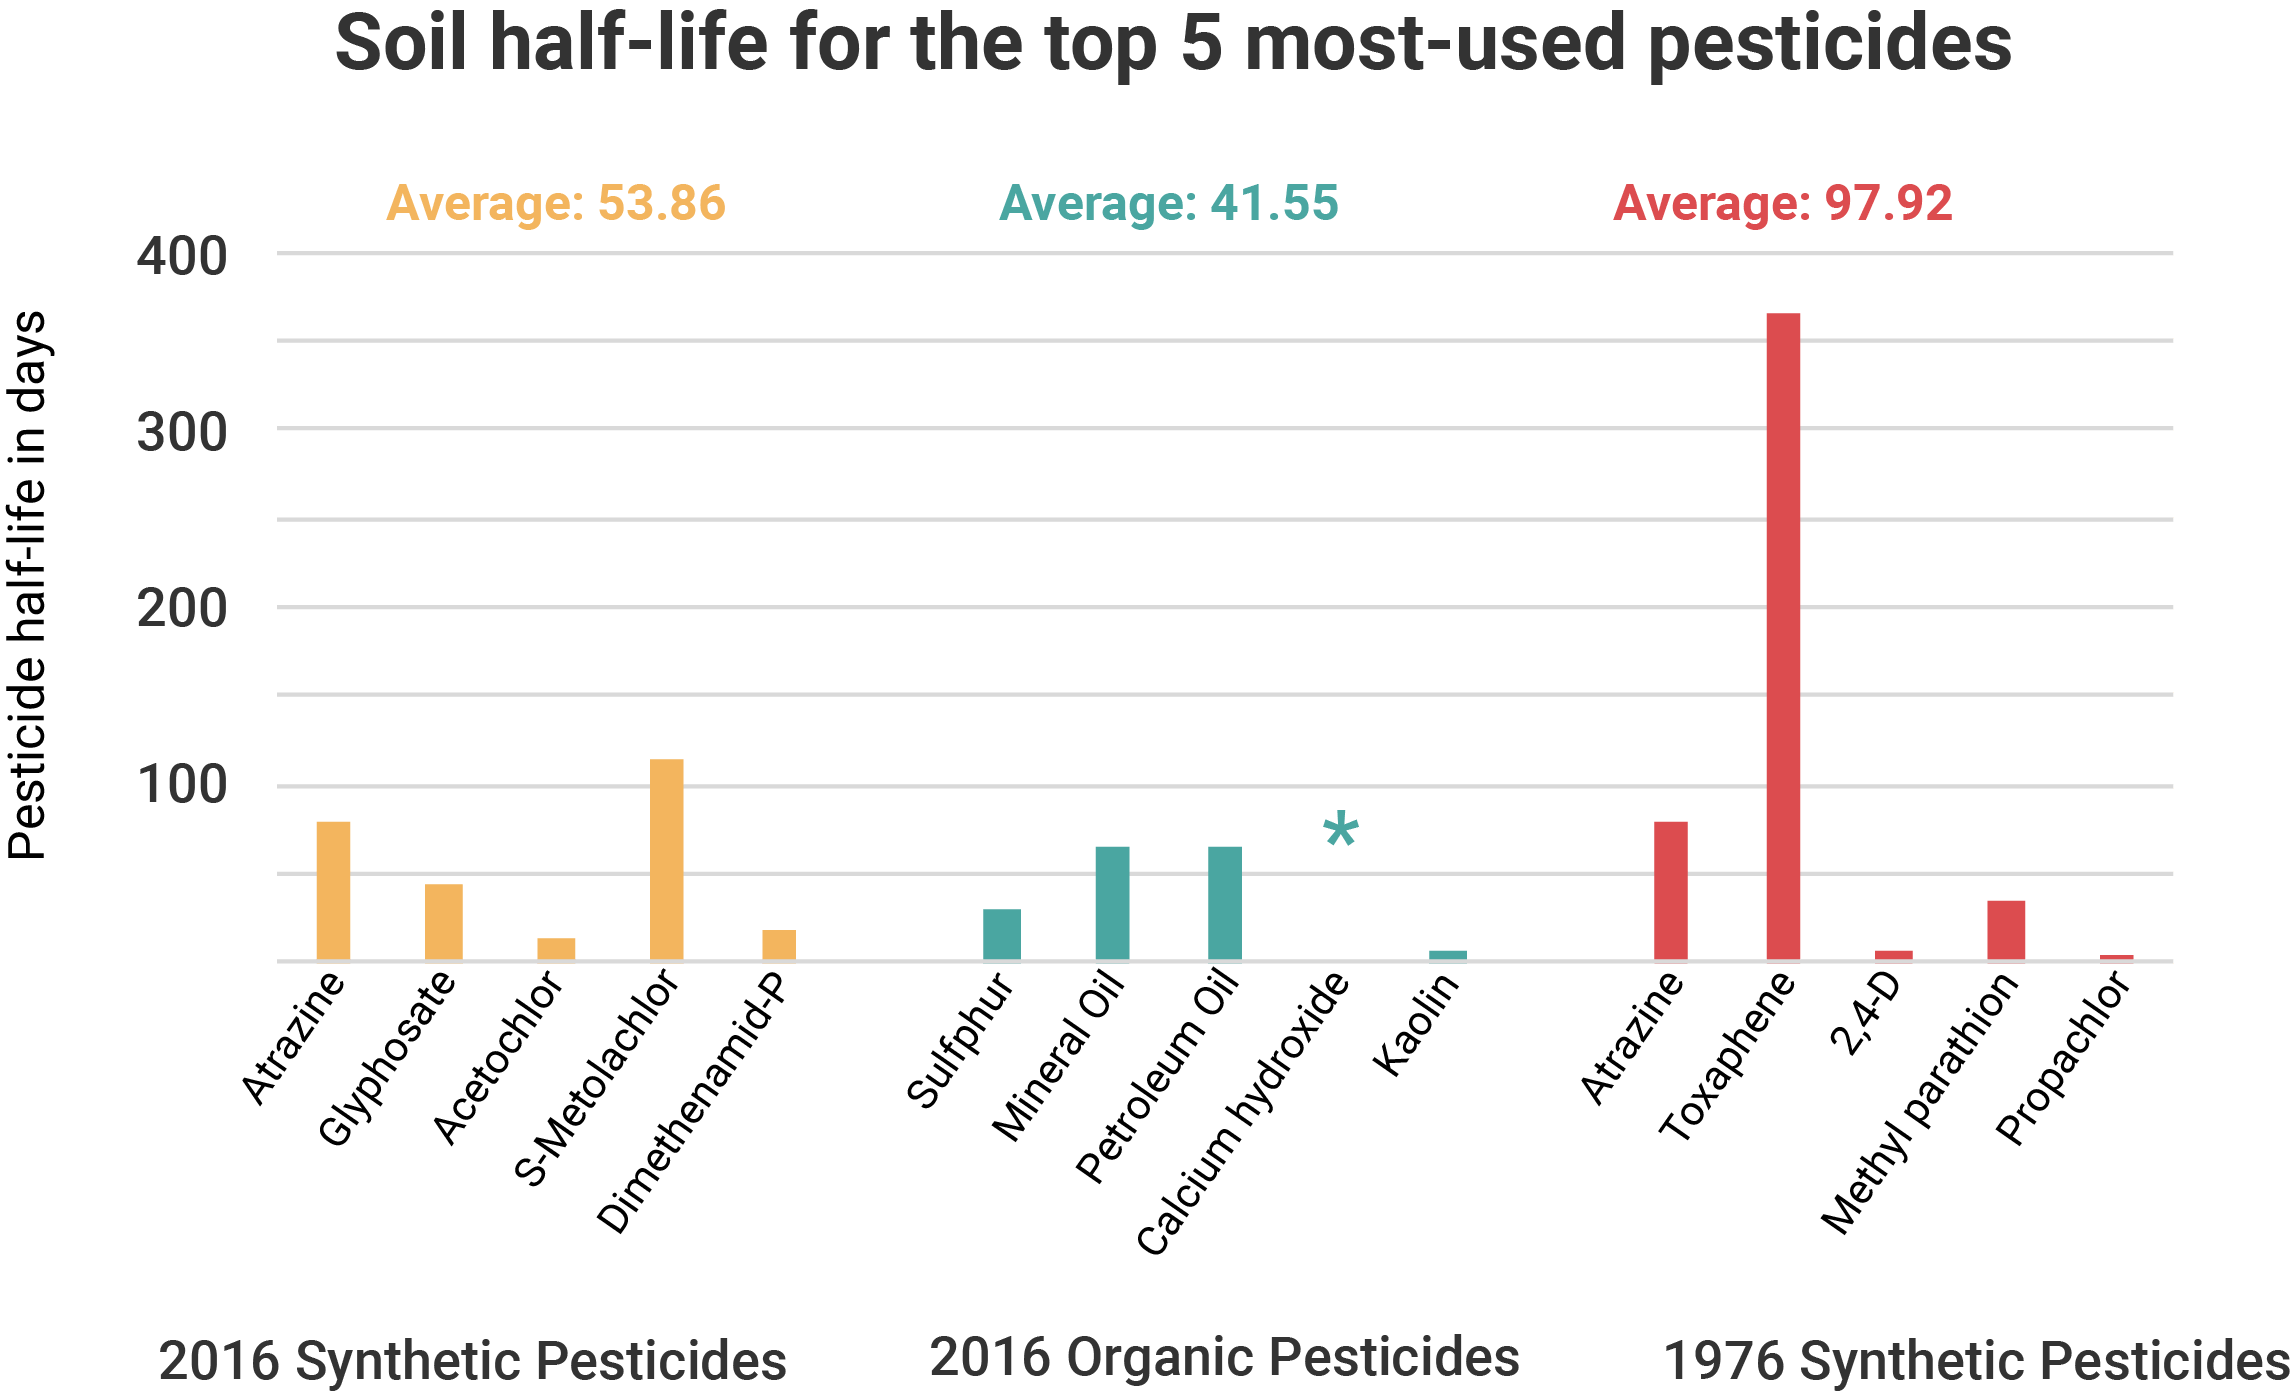 A graph comparing the soil half-lives (in days) of the top 5 most used synthetic pesticides from 1976, organic pesticides from 2016, and synthetic pesticides from 2016.